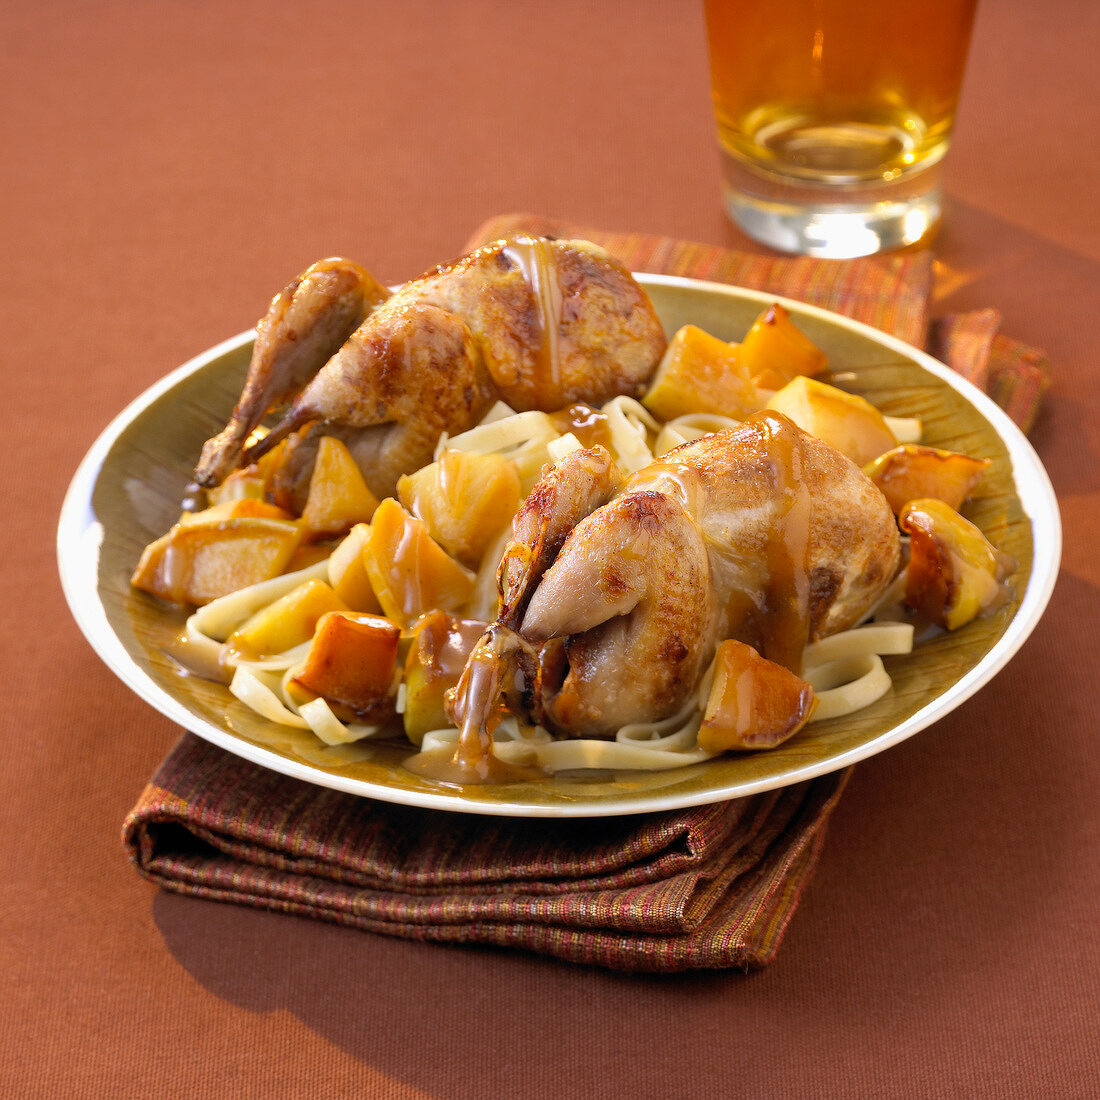 Free-range quails with spicy apples